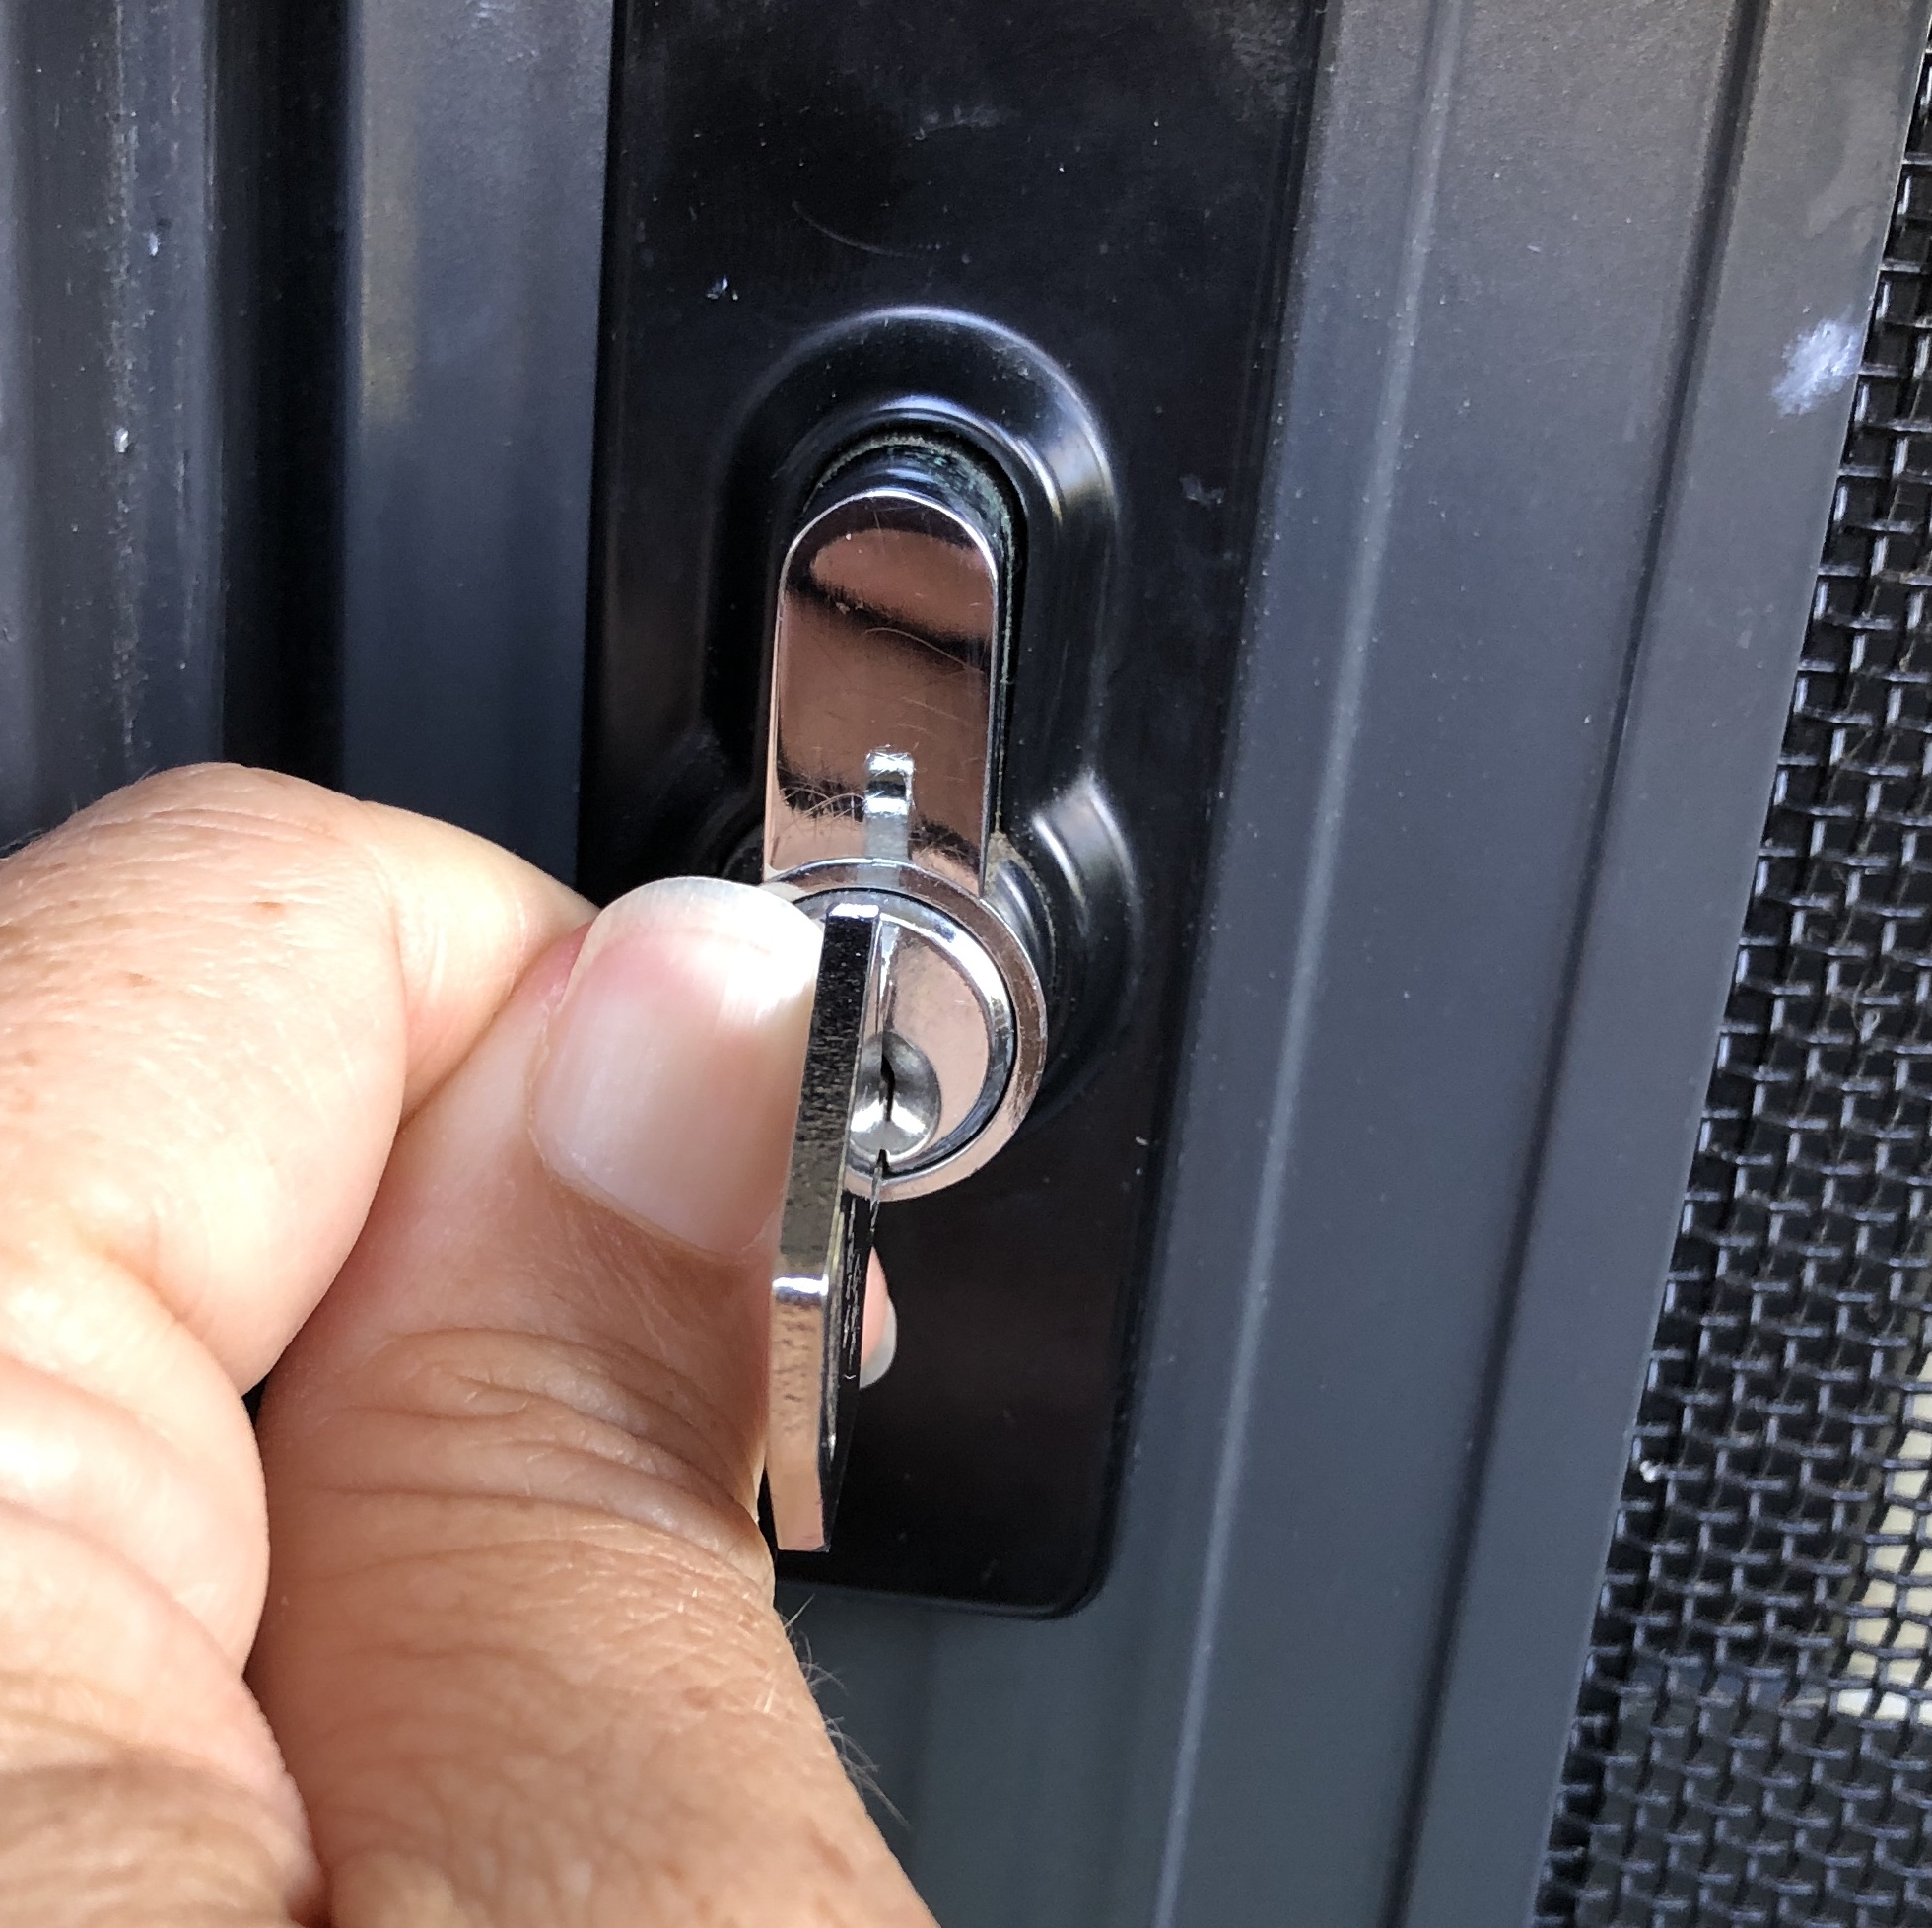 Locked Out and Trunk-ated: How to Retrieve Your Keys